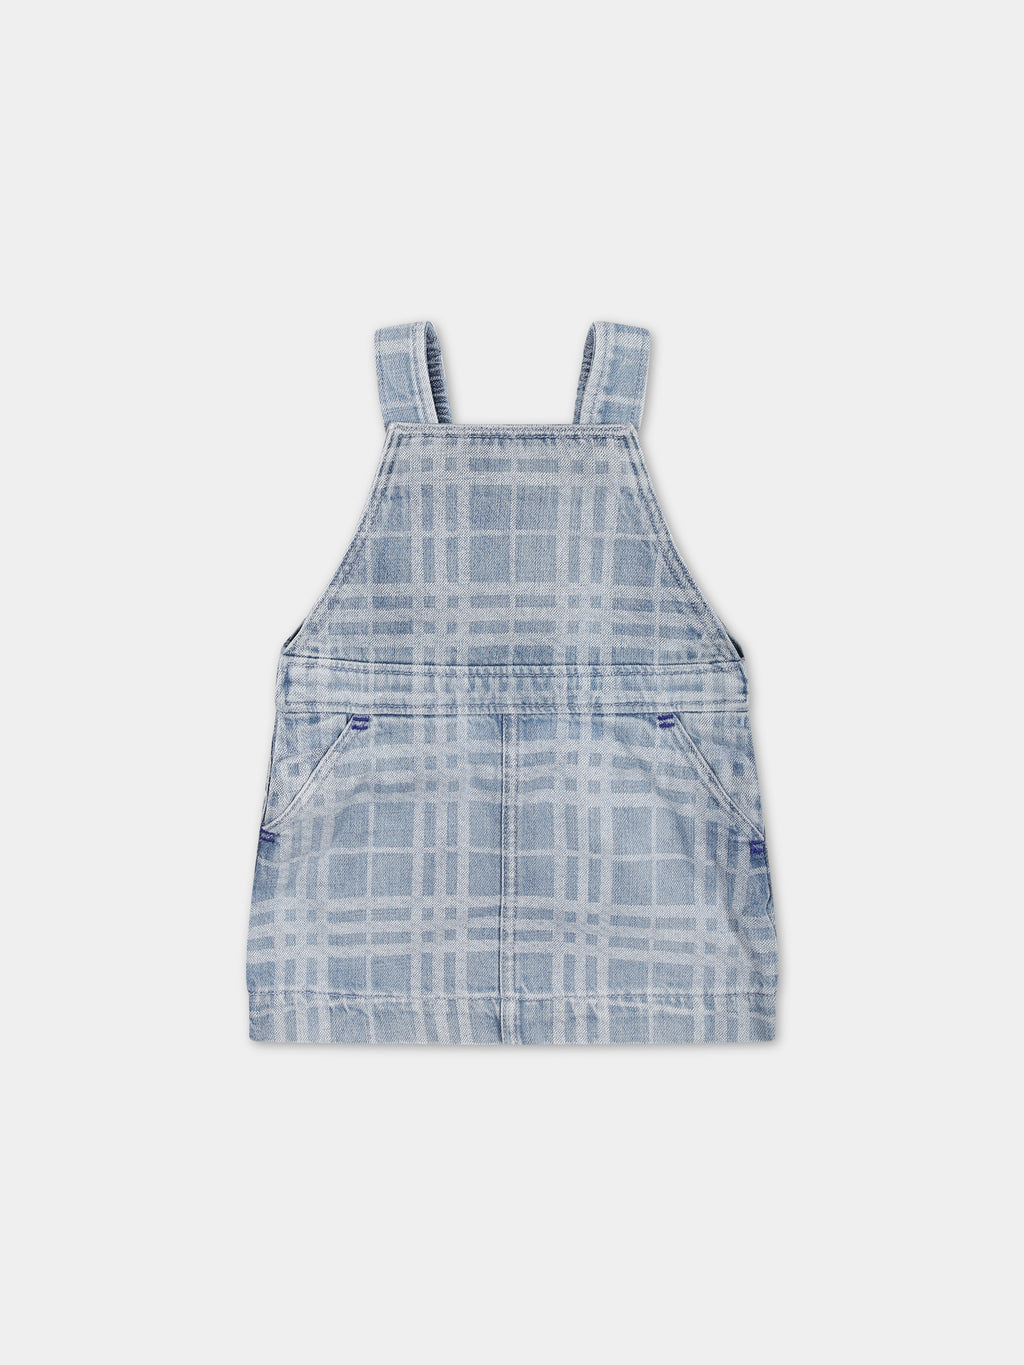 Denim dungarees for baby girl with iconic all-over check